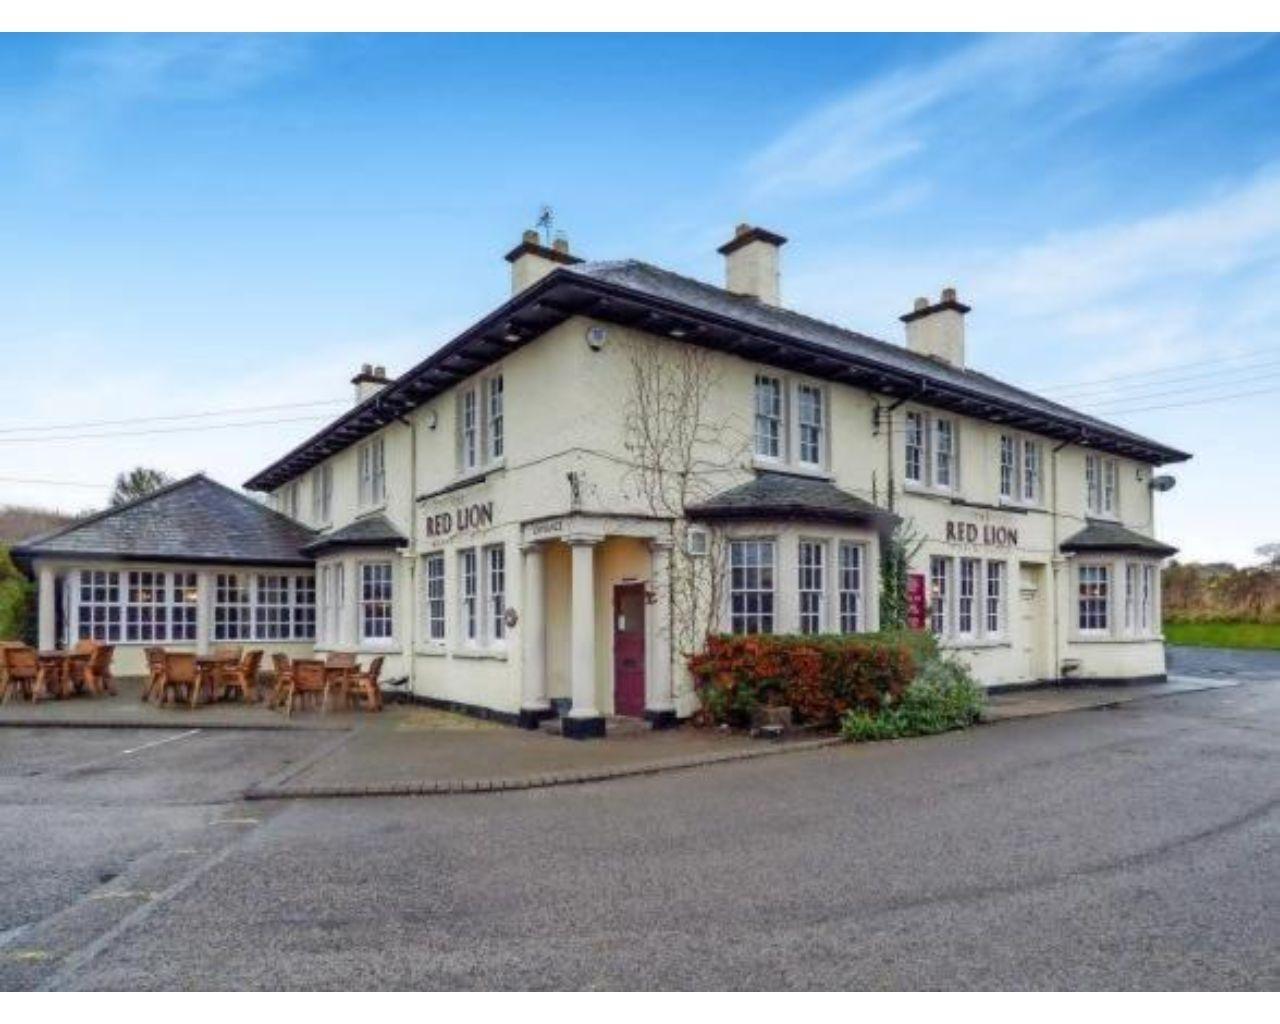 Red Lion Hotel Plawsworth - Chester-le-Street